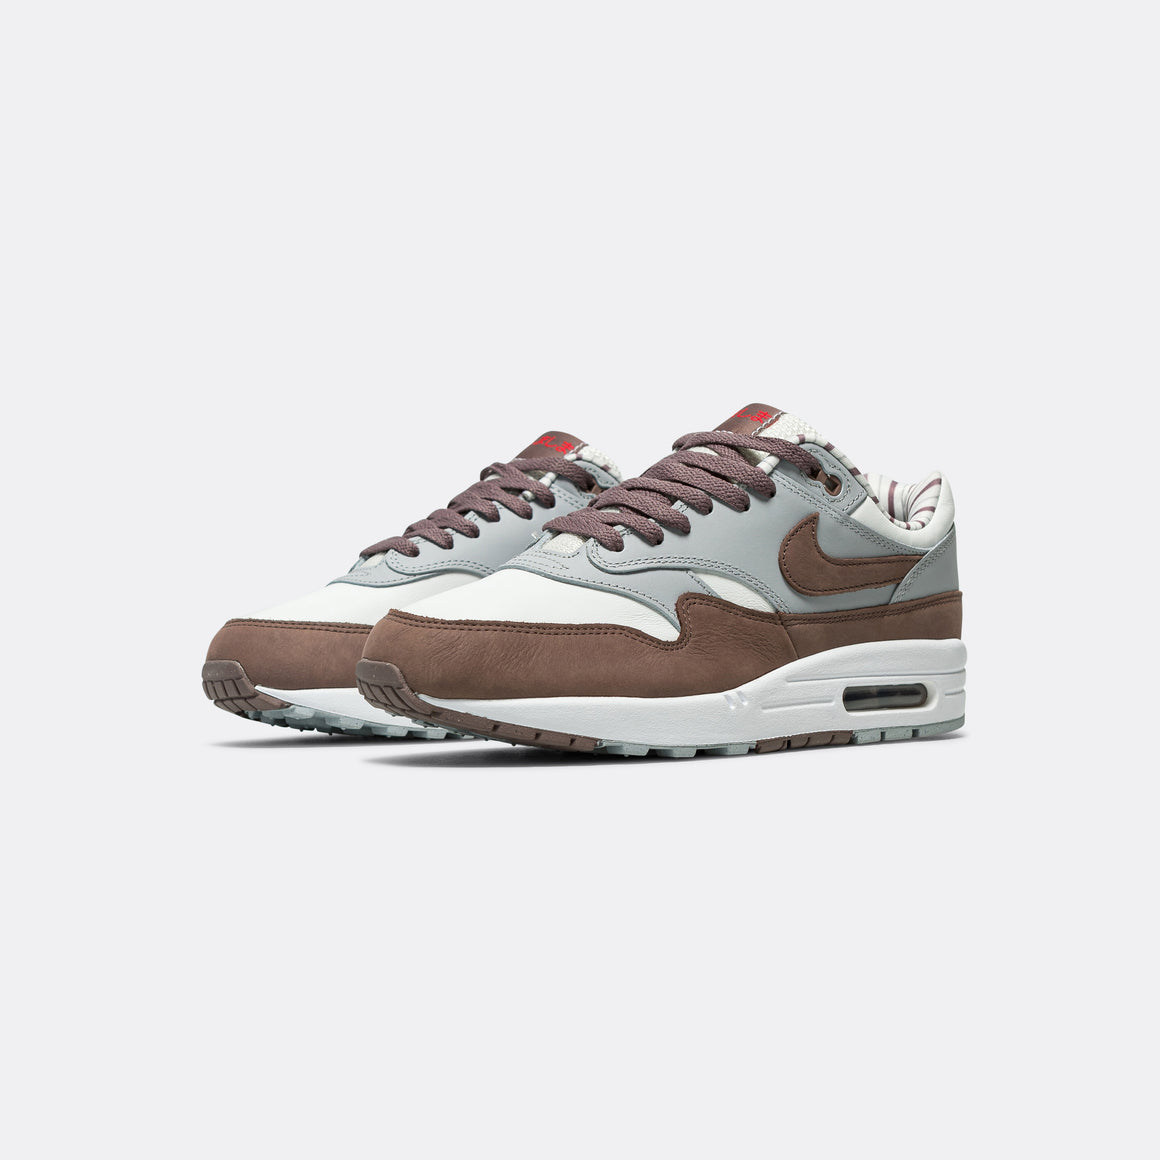 Nike - Air Max 1 PRM - Summit White/Plum Eclipse-Wolf Grey - UP THERE